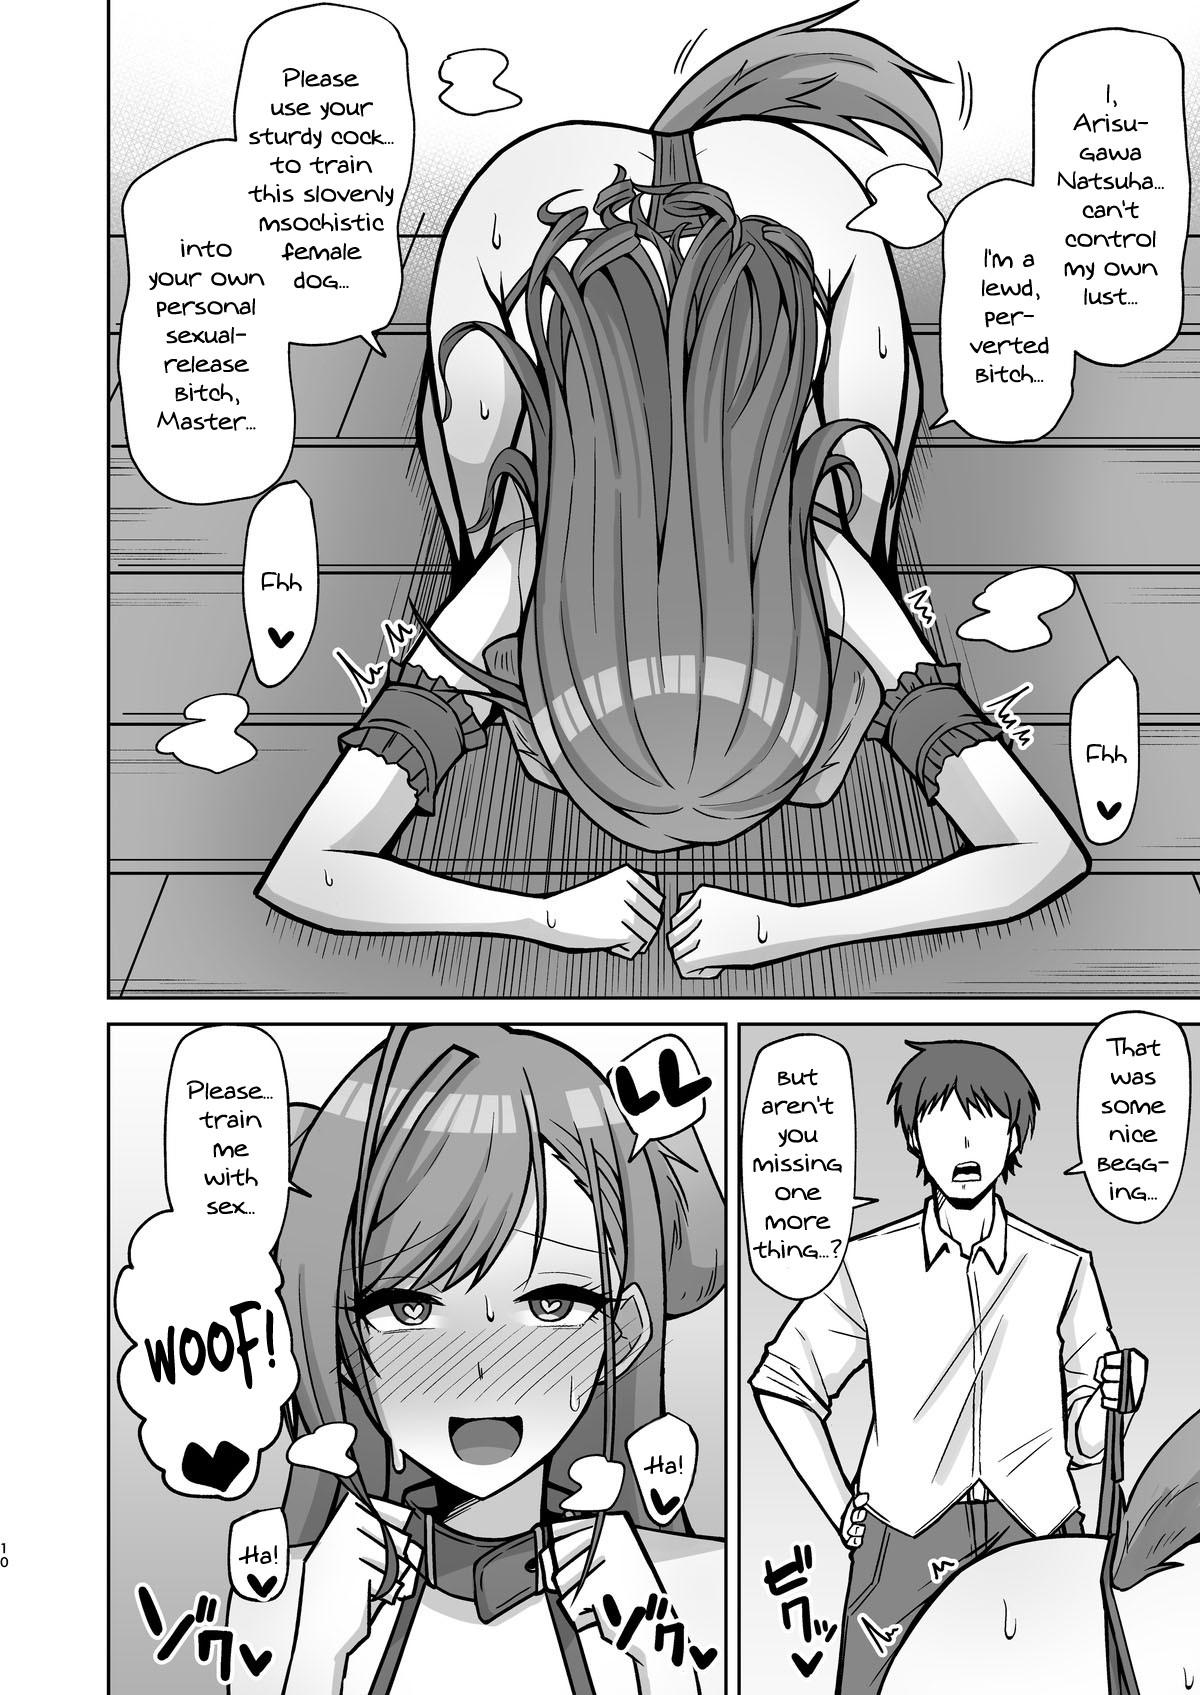 Muscle InuCos H tte Sugoi no yo! | Fucking While Dressed Like a Dog Feels Amazing! - The idolmaster Rough Sex - Page 9